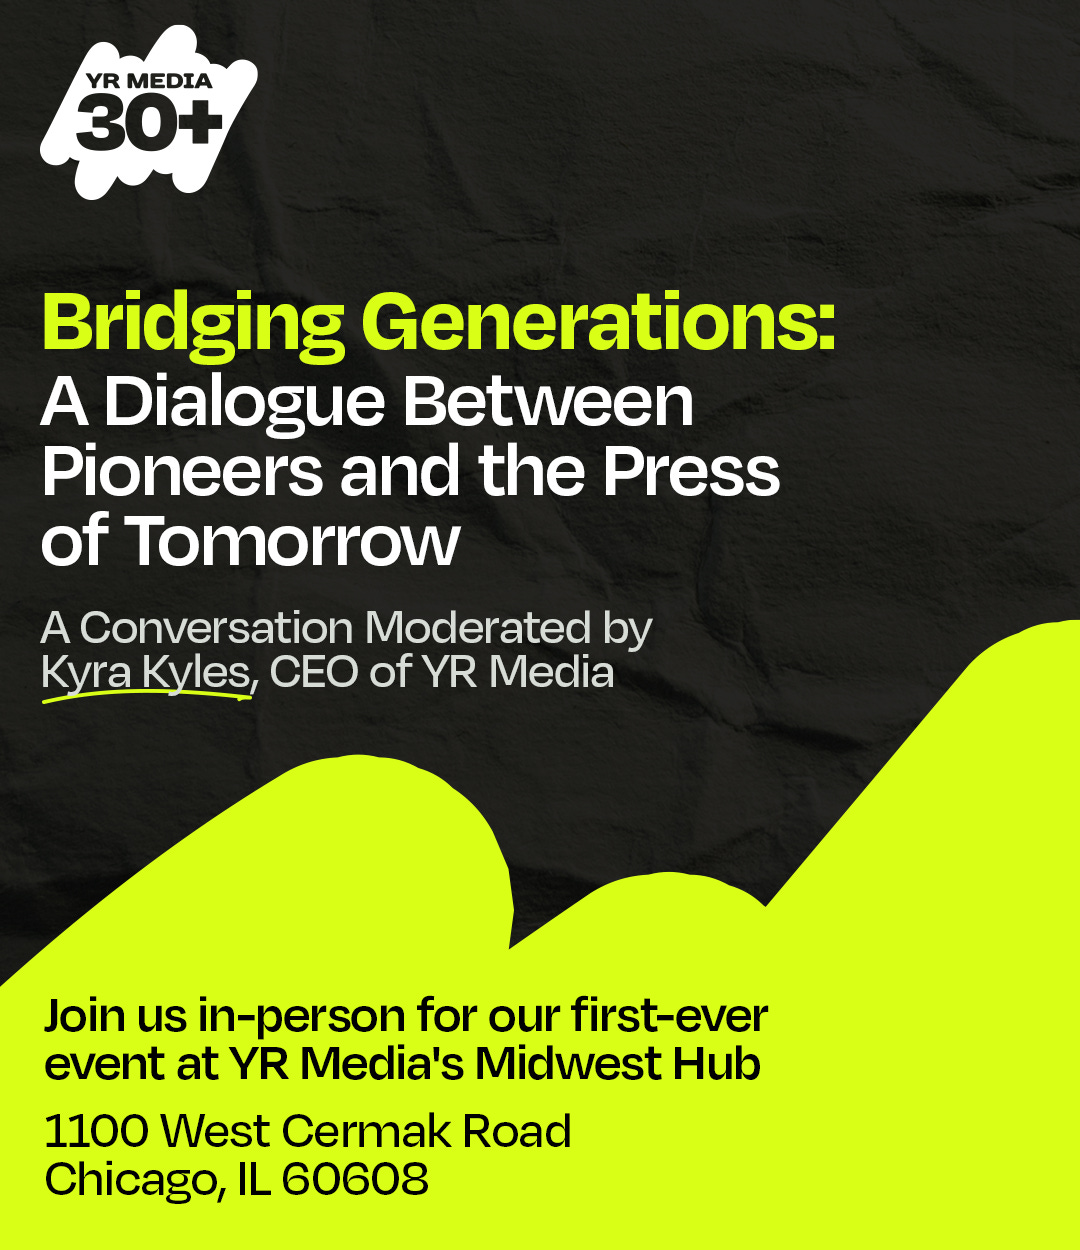 Infographic promoting an event at YR Media in Chicago